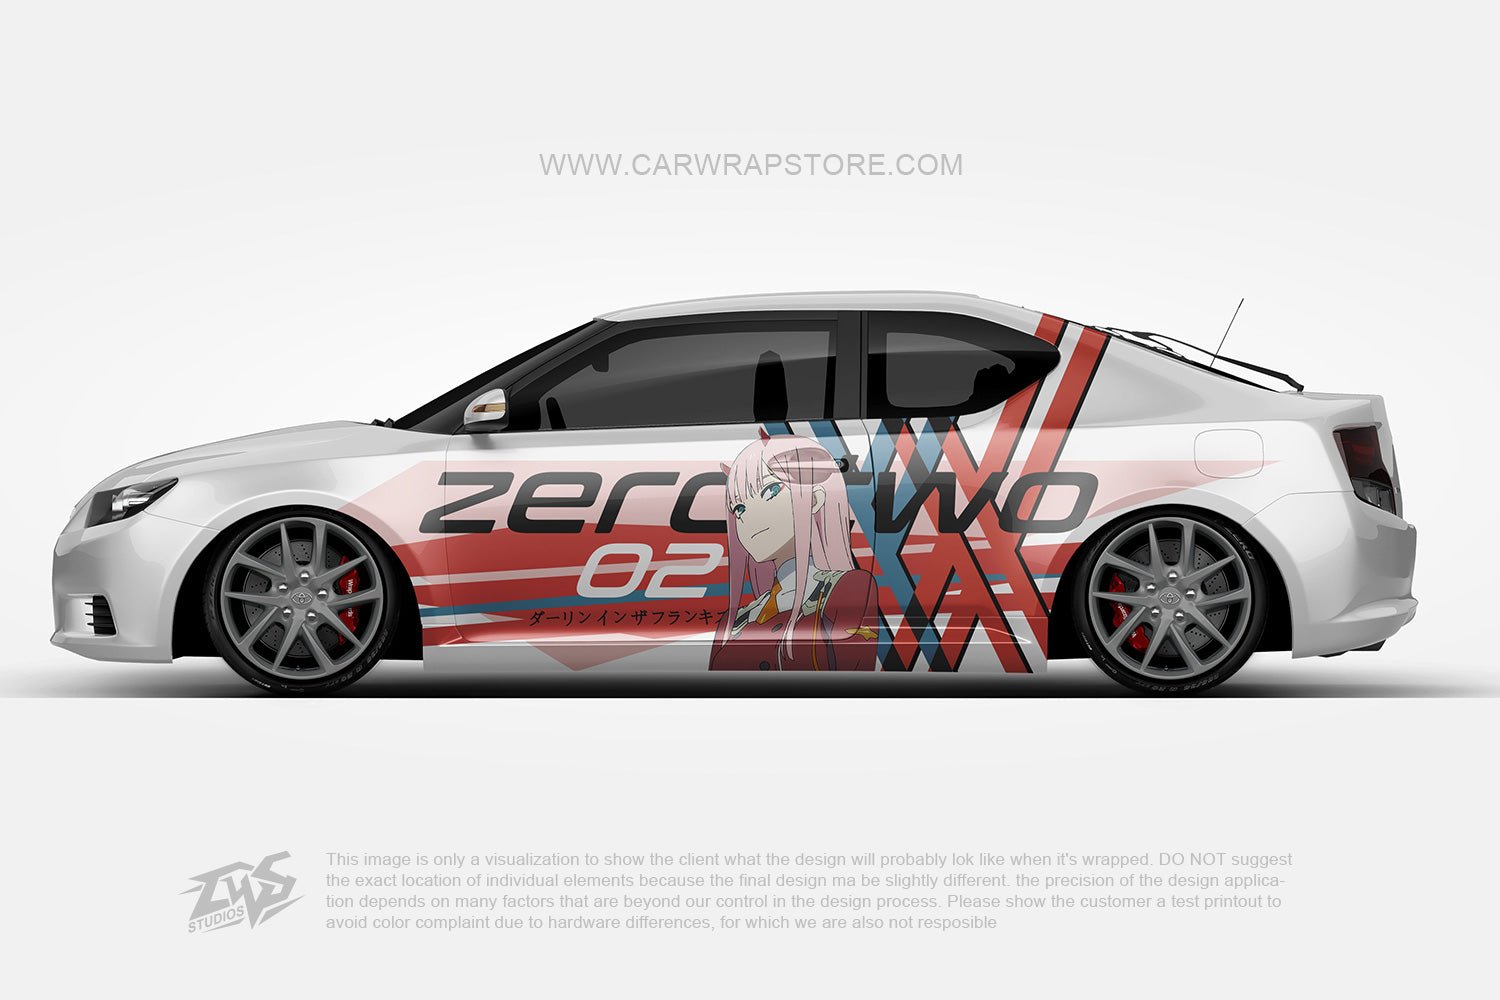 Zero Two DARLING in the FRANXX【002-04】 - Car Wrap Store